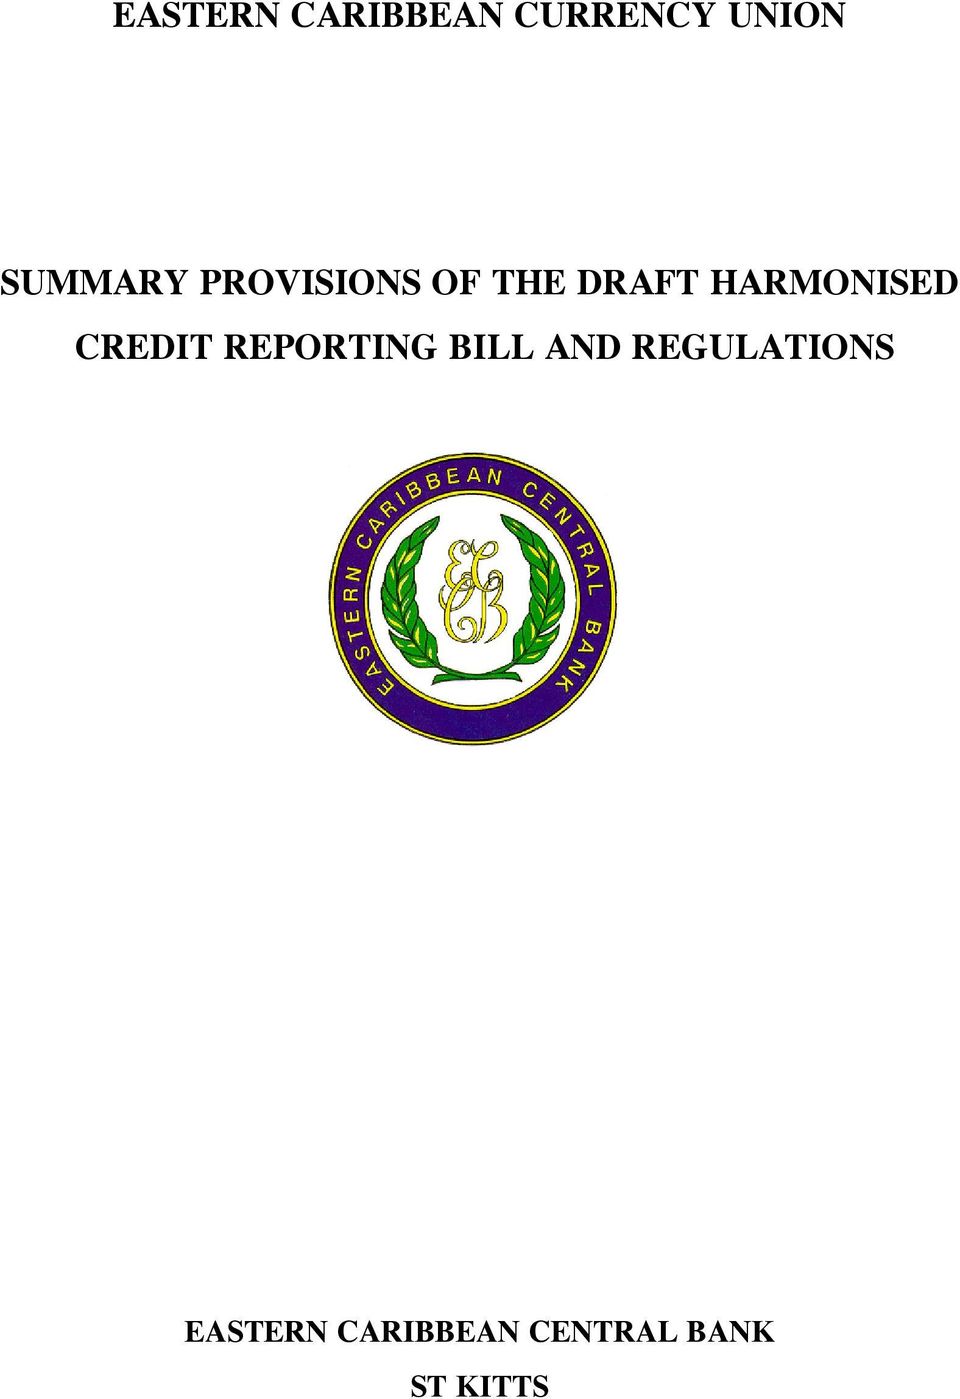 HARMONISED CREDIT REPORTING BILL AND